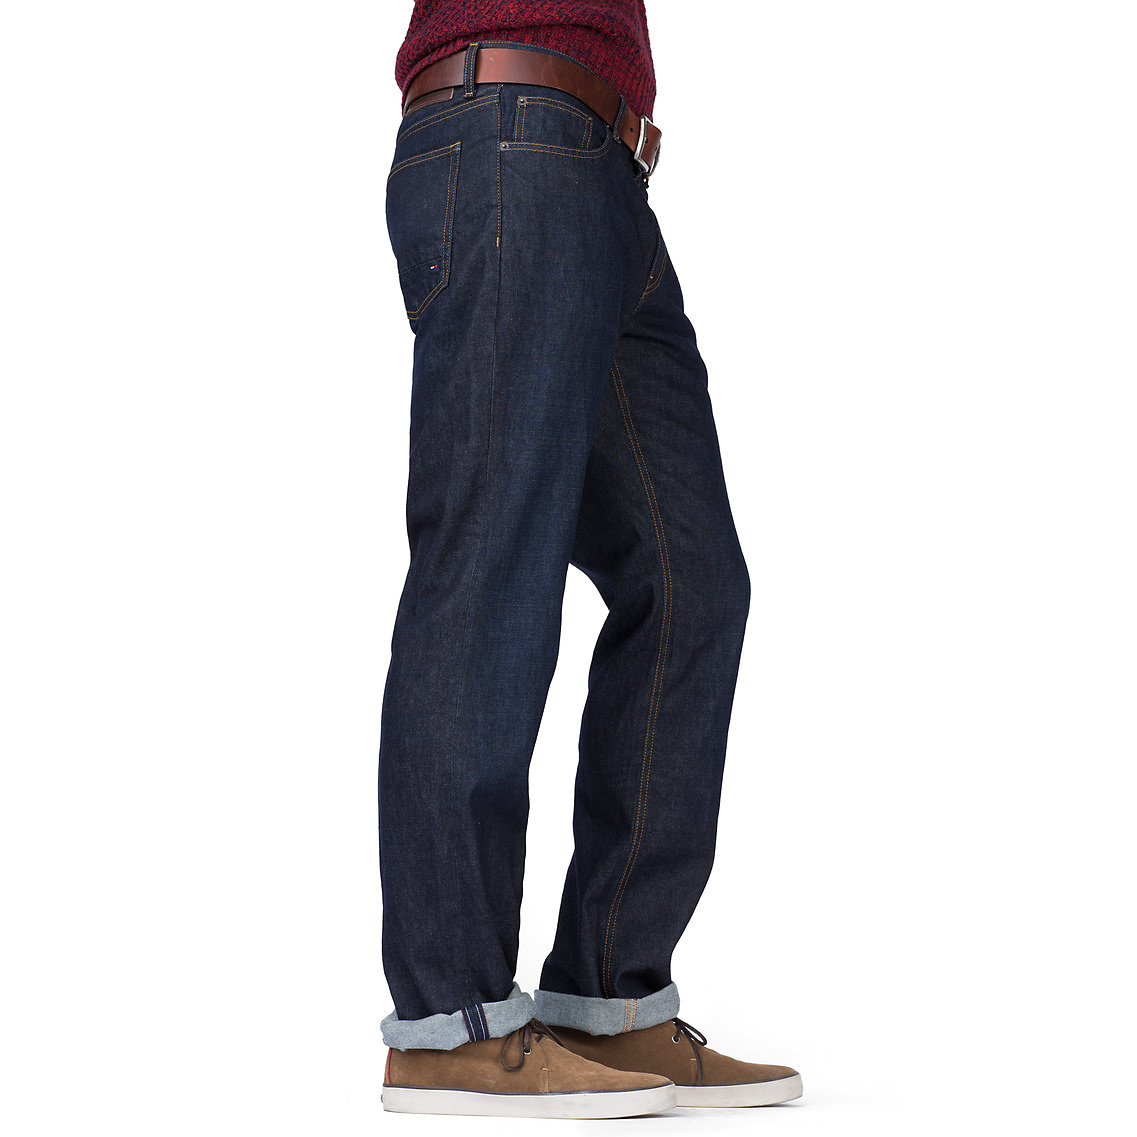 Tommy Hilfiger Mercer Stretch Regular Fit Factory Sale, 59% OFF |  www.smokymountains.org